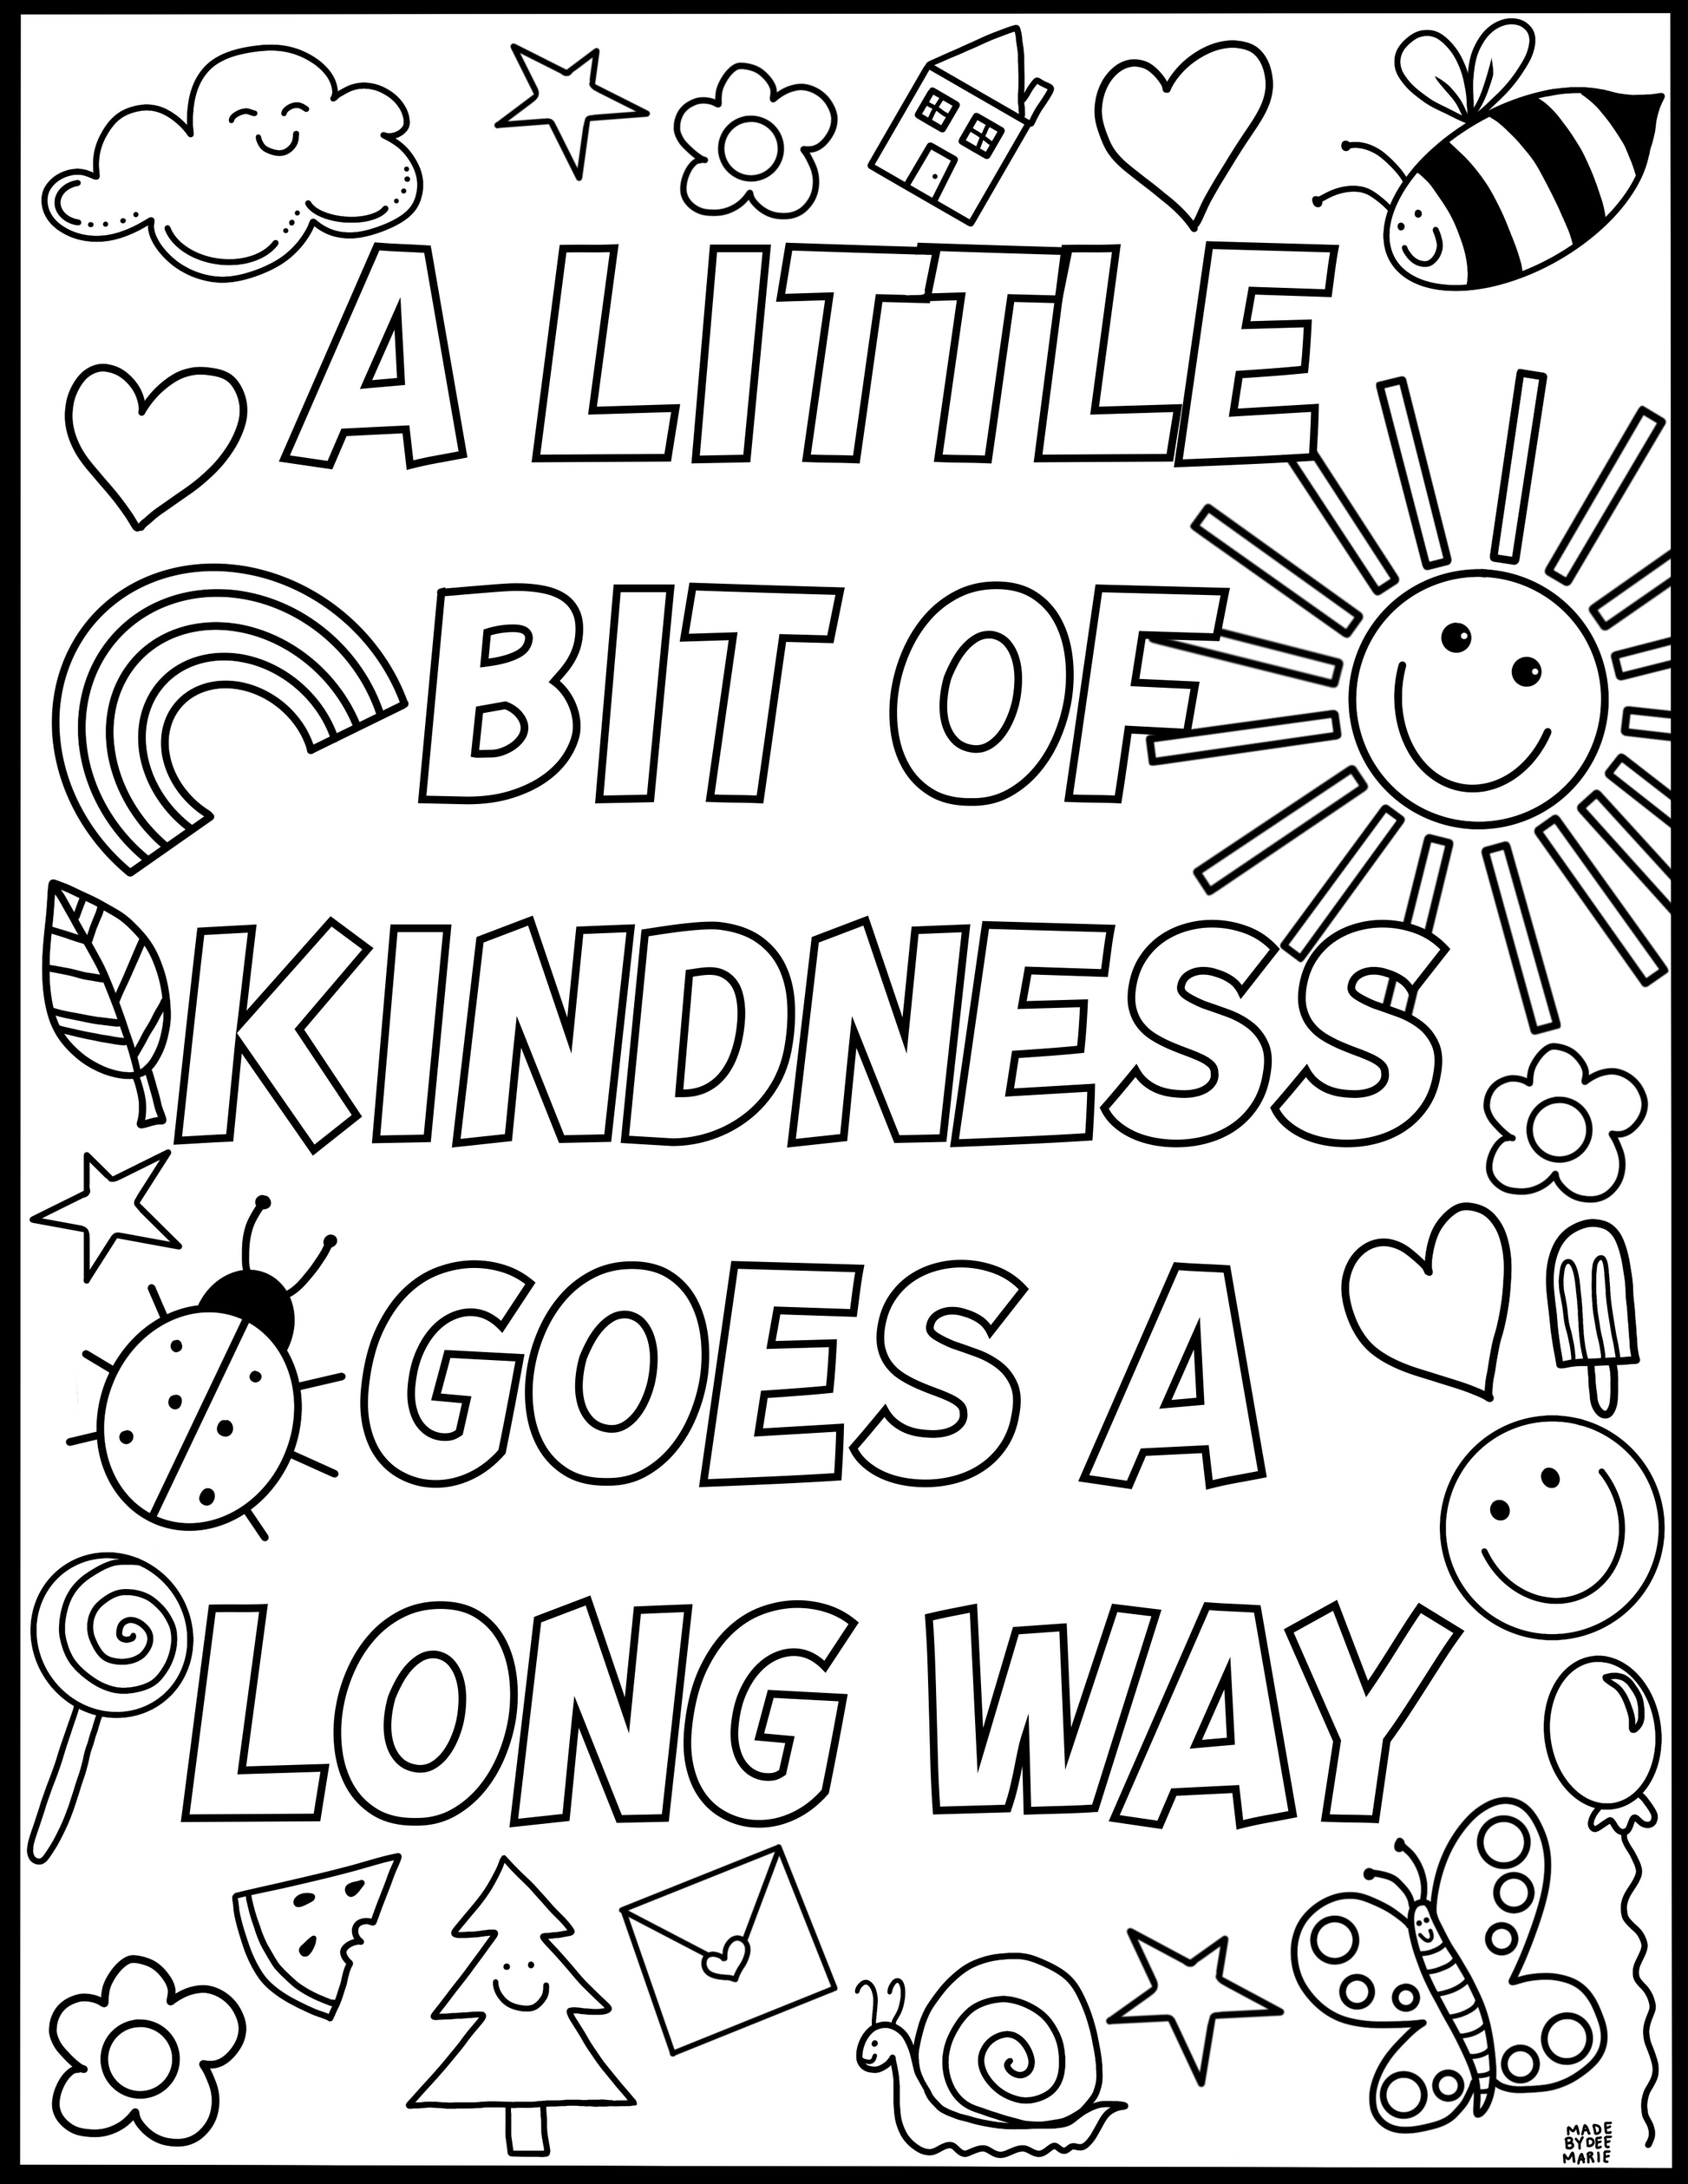 A Little Bit Of Kindness Coloring Page (Digital Download) – madebydeemarie